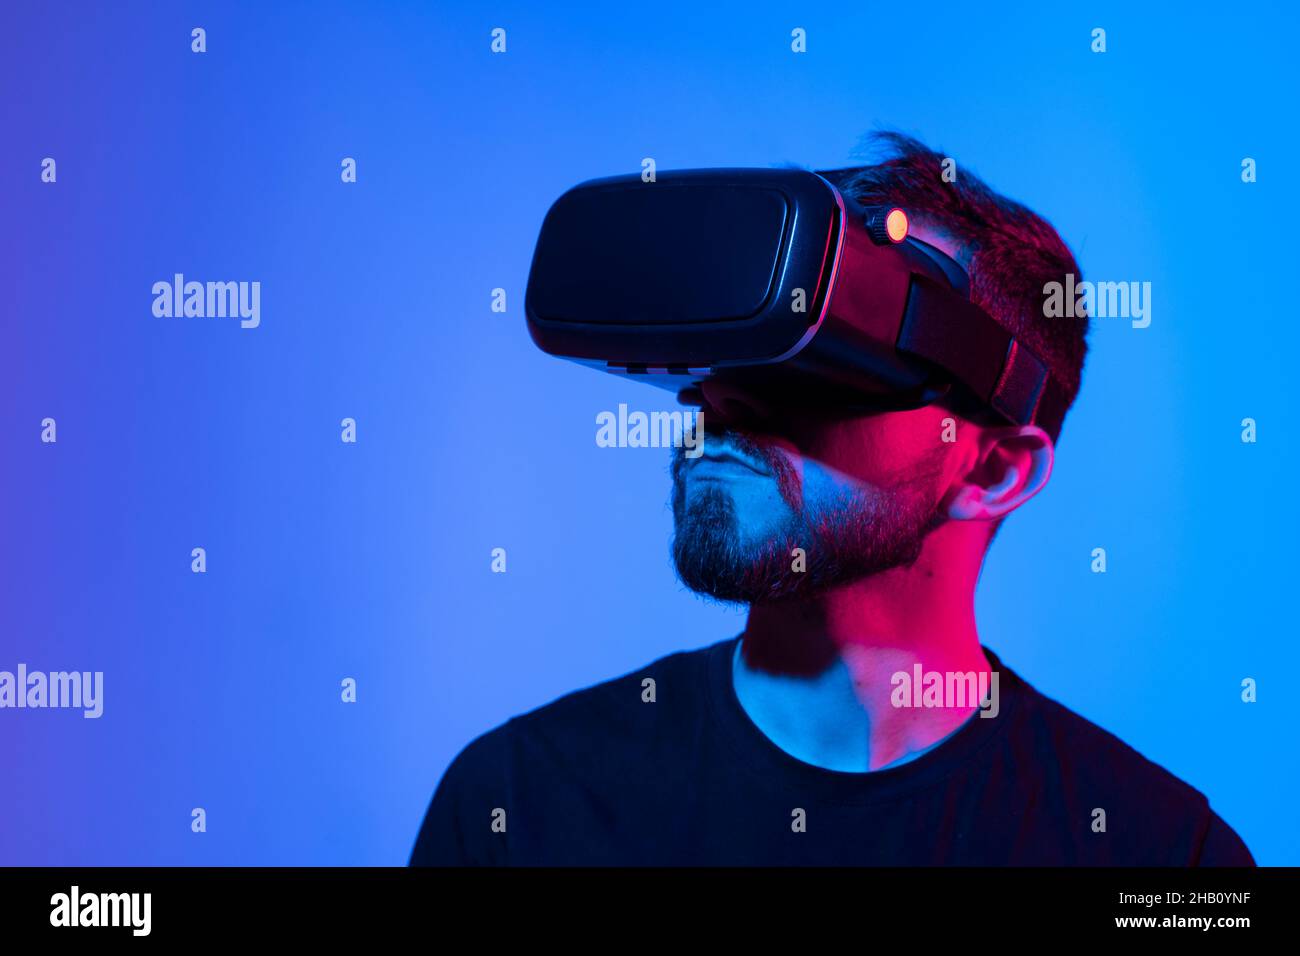 Portrait of man using VR headset while playing a video game in dark interior illuminated neon light. Close-up futuristic googles with colored light. Stock Photo